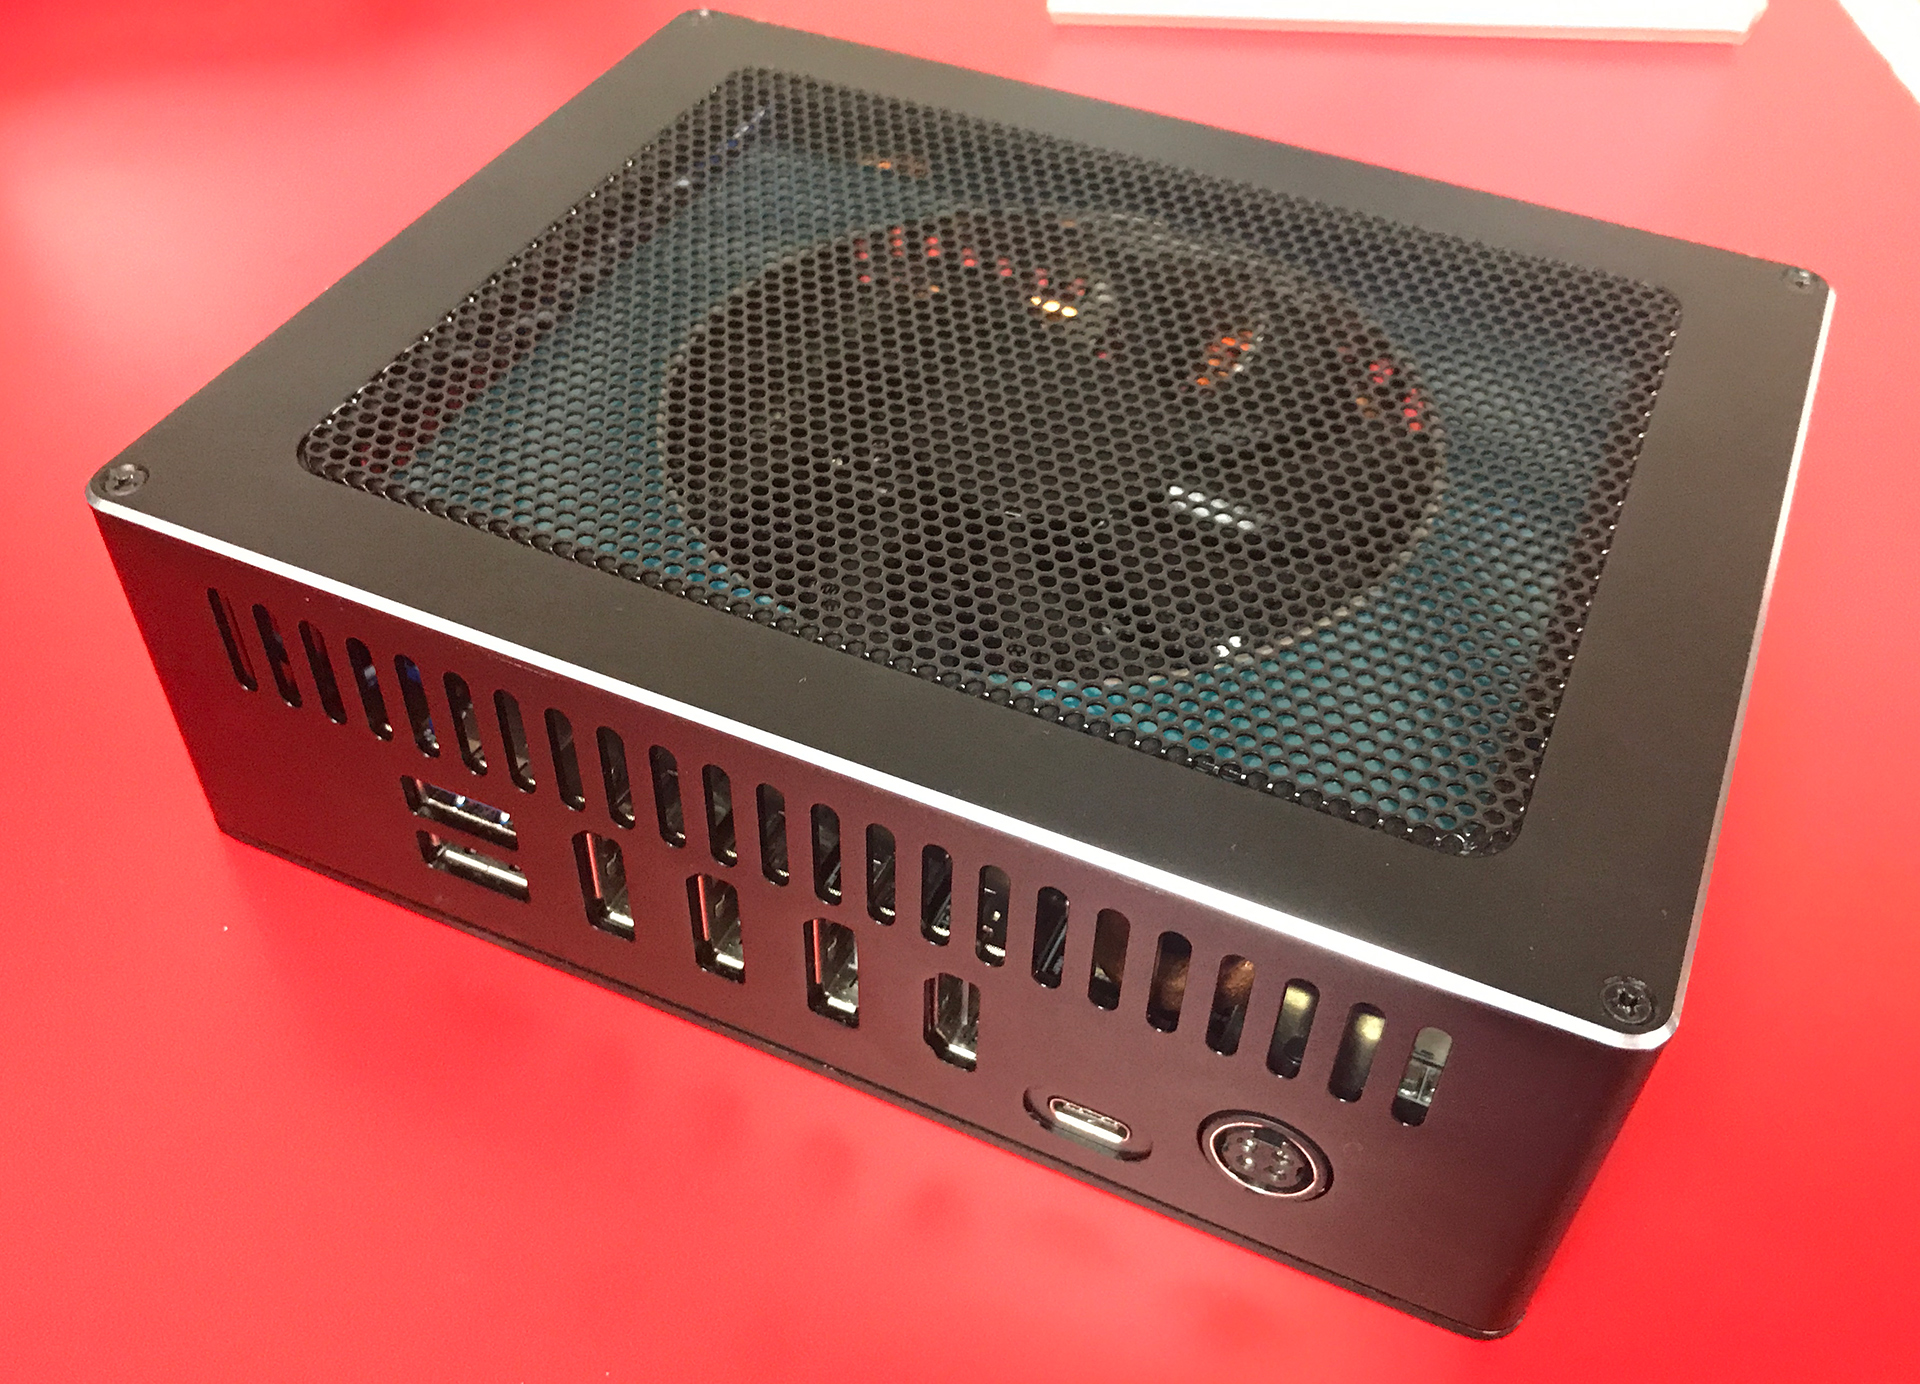 peber forskel Mark PowerColor Shows Off Tiny Thunderbolt 3 External GPU Boxes Money Can't Buy